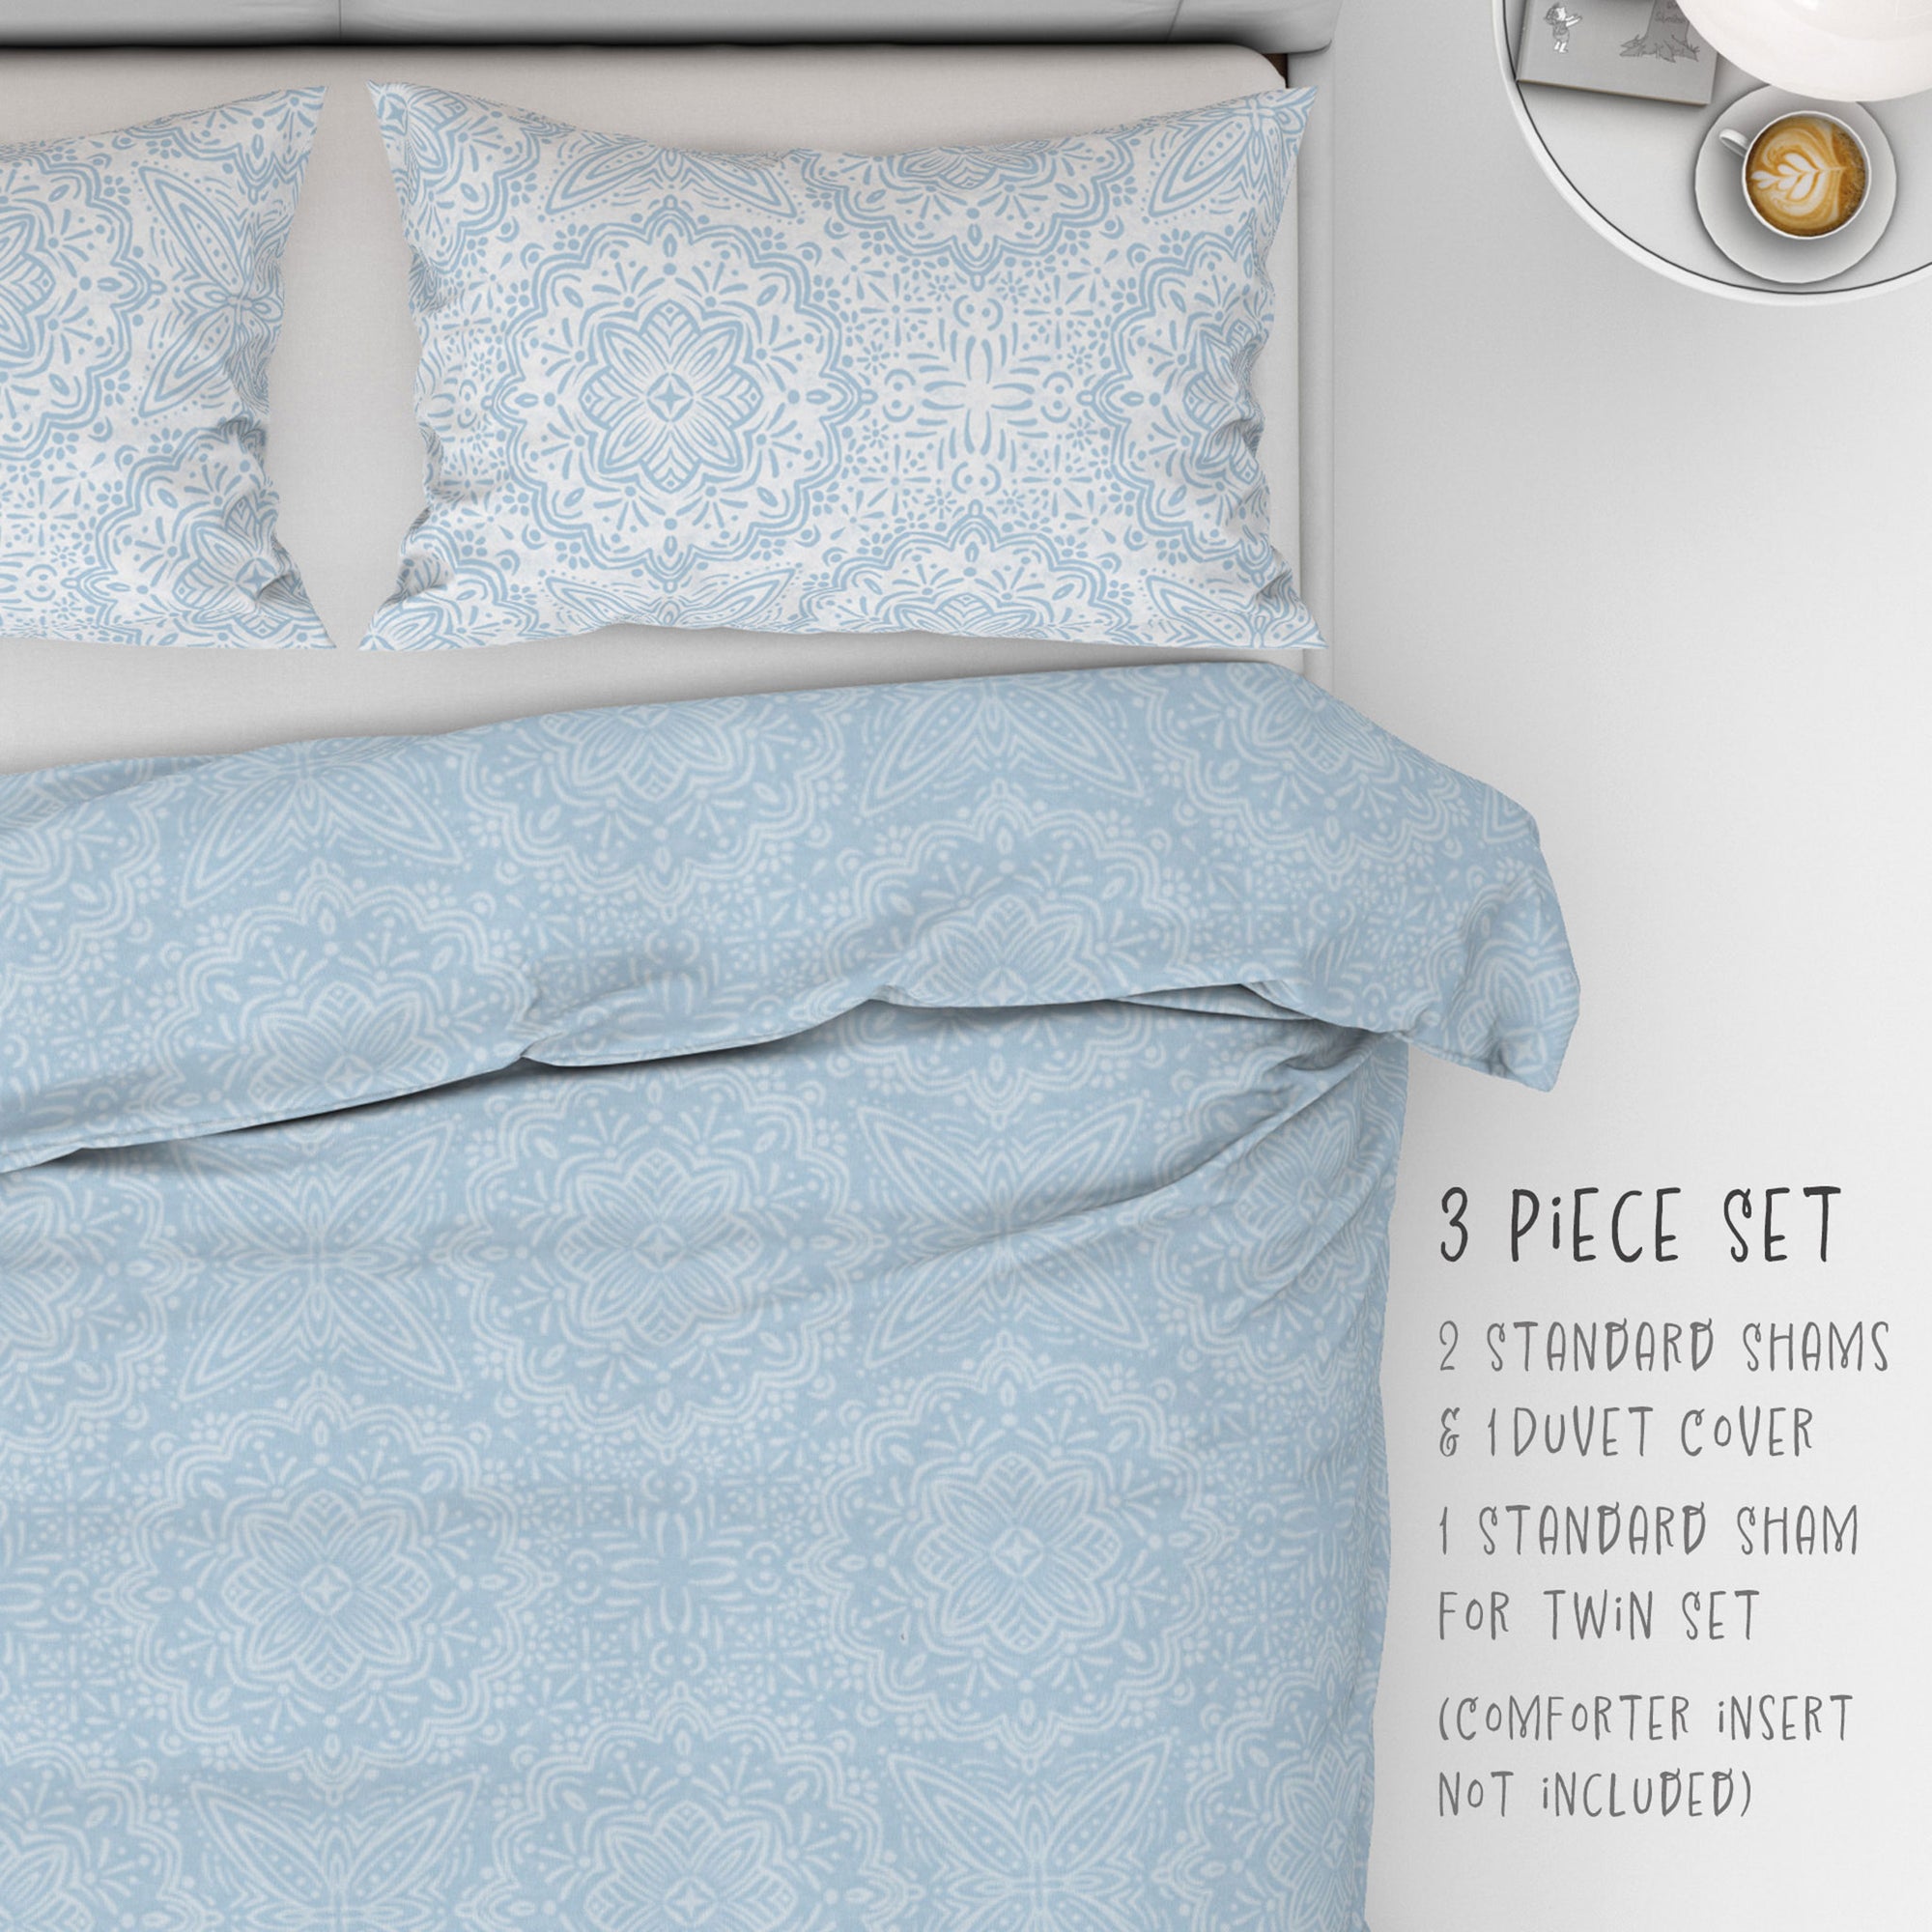  3 Piece Set for Queen & King sizes - Mandala Blue Boho Bliss Cotton Bedding comes with Duvet cover and two Shams